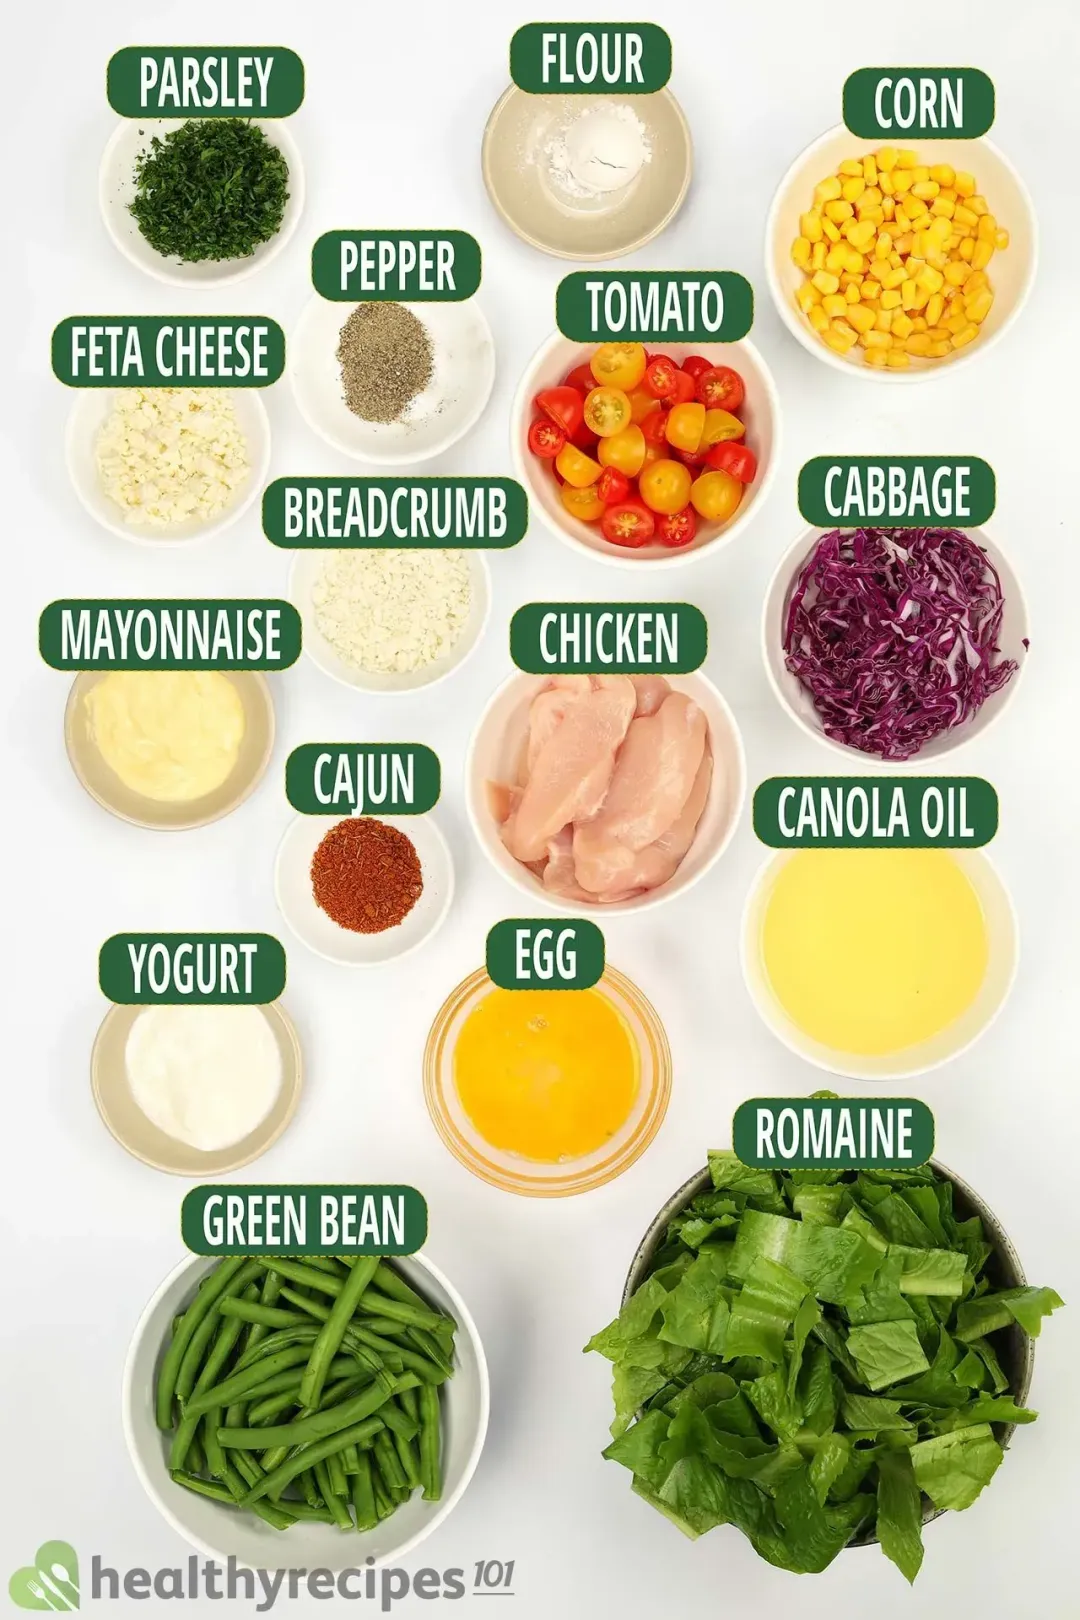 Ingredients for Fried Chicken Salad